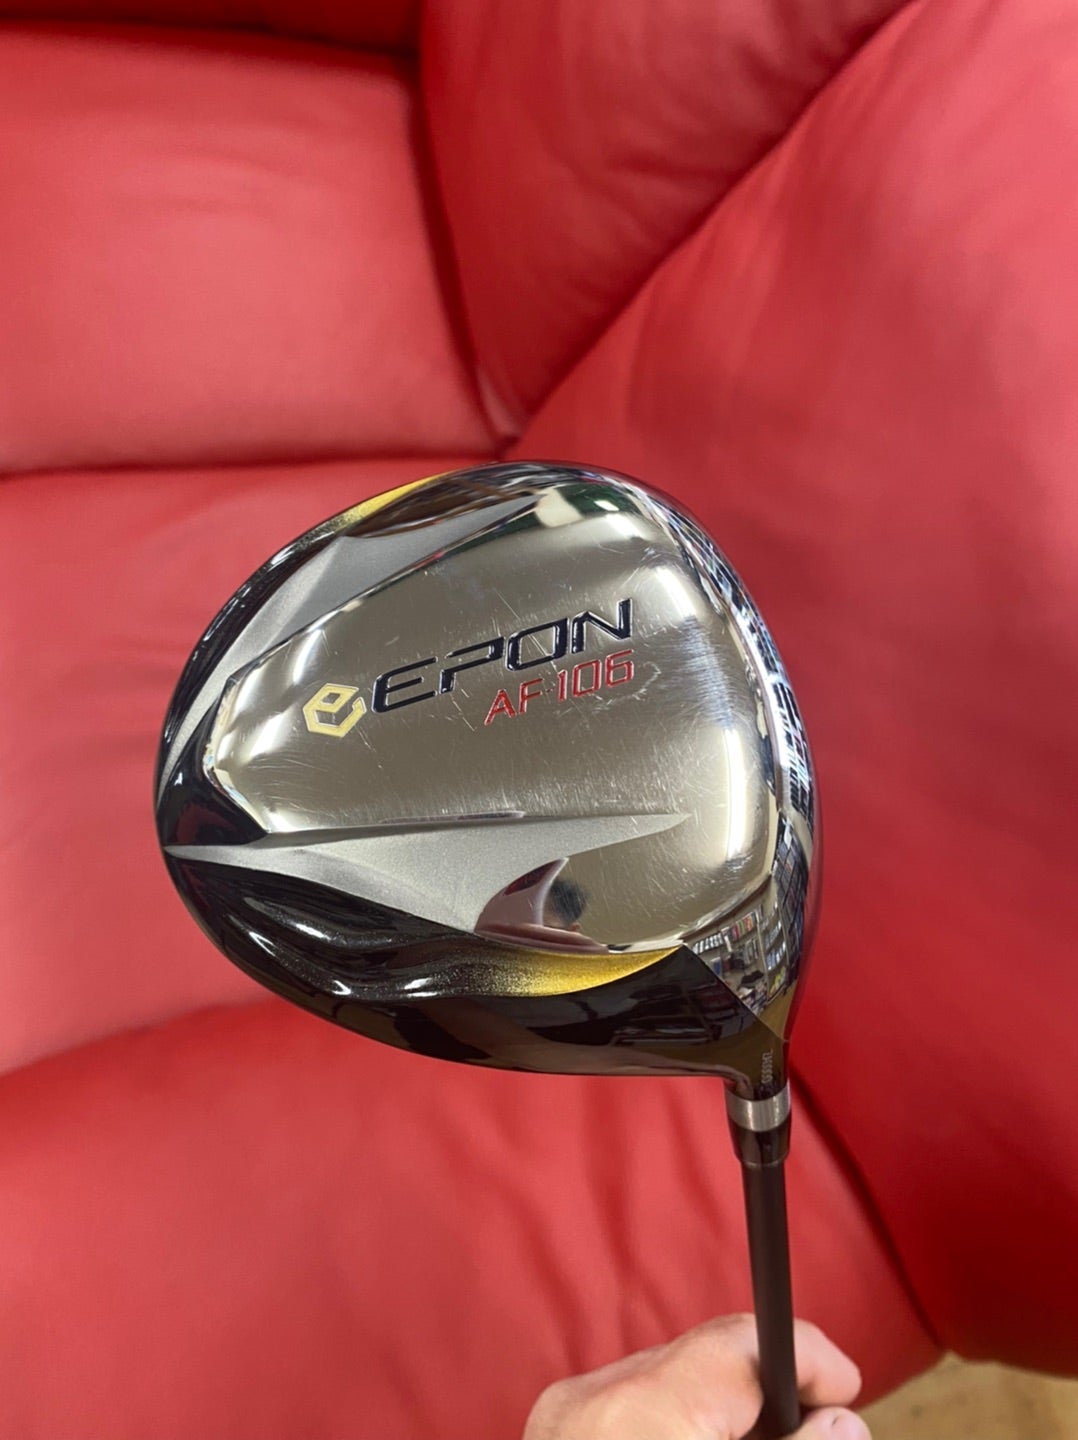 EPON AF-106 ＆ AF-306 まもなく発売！！ | ベストギアをあなたに！！